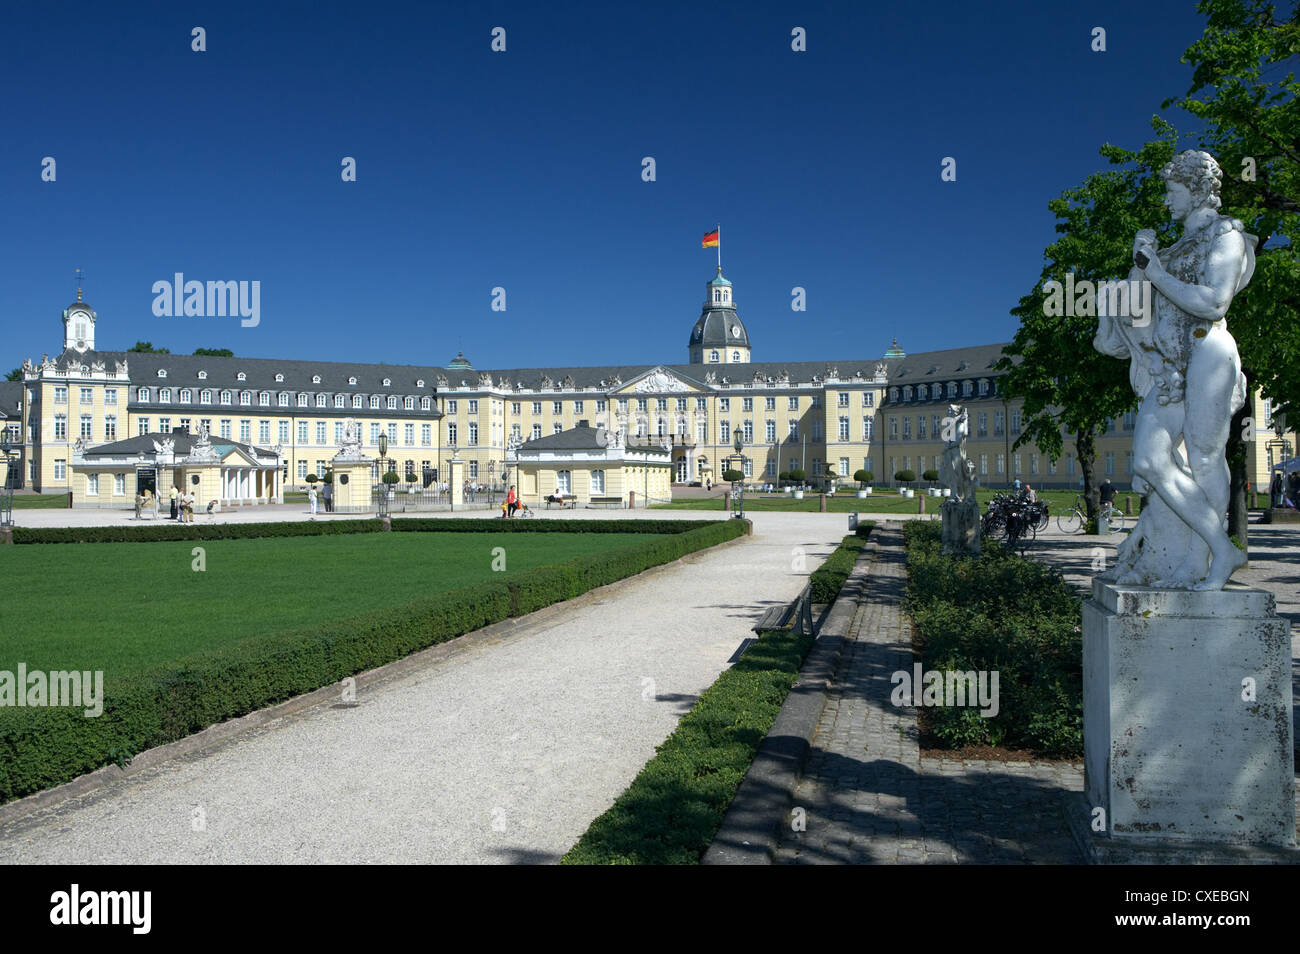 Karlsruhe - The baroque palace with park Stock Photo